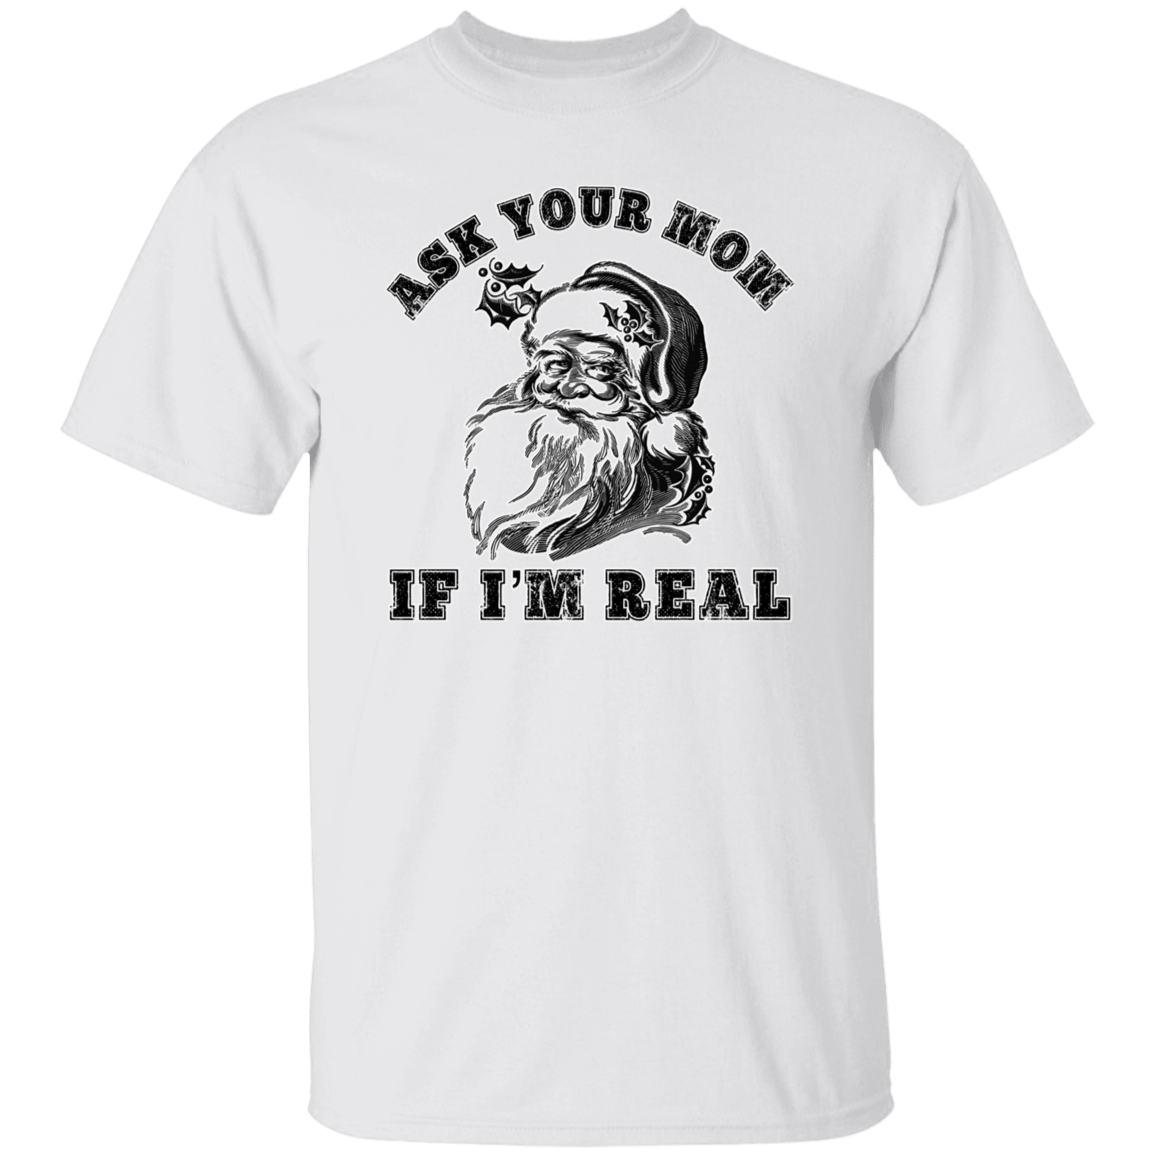 Ask Your Mom G500 5.3 oz. T-Shirt